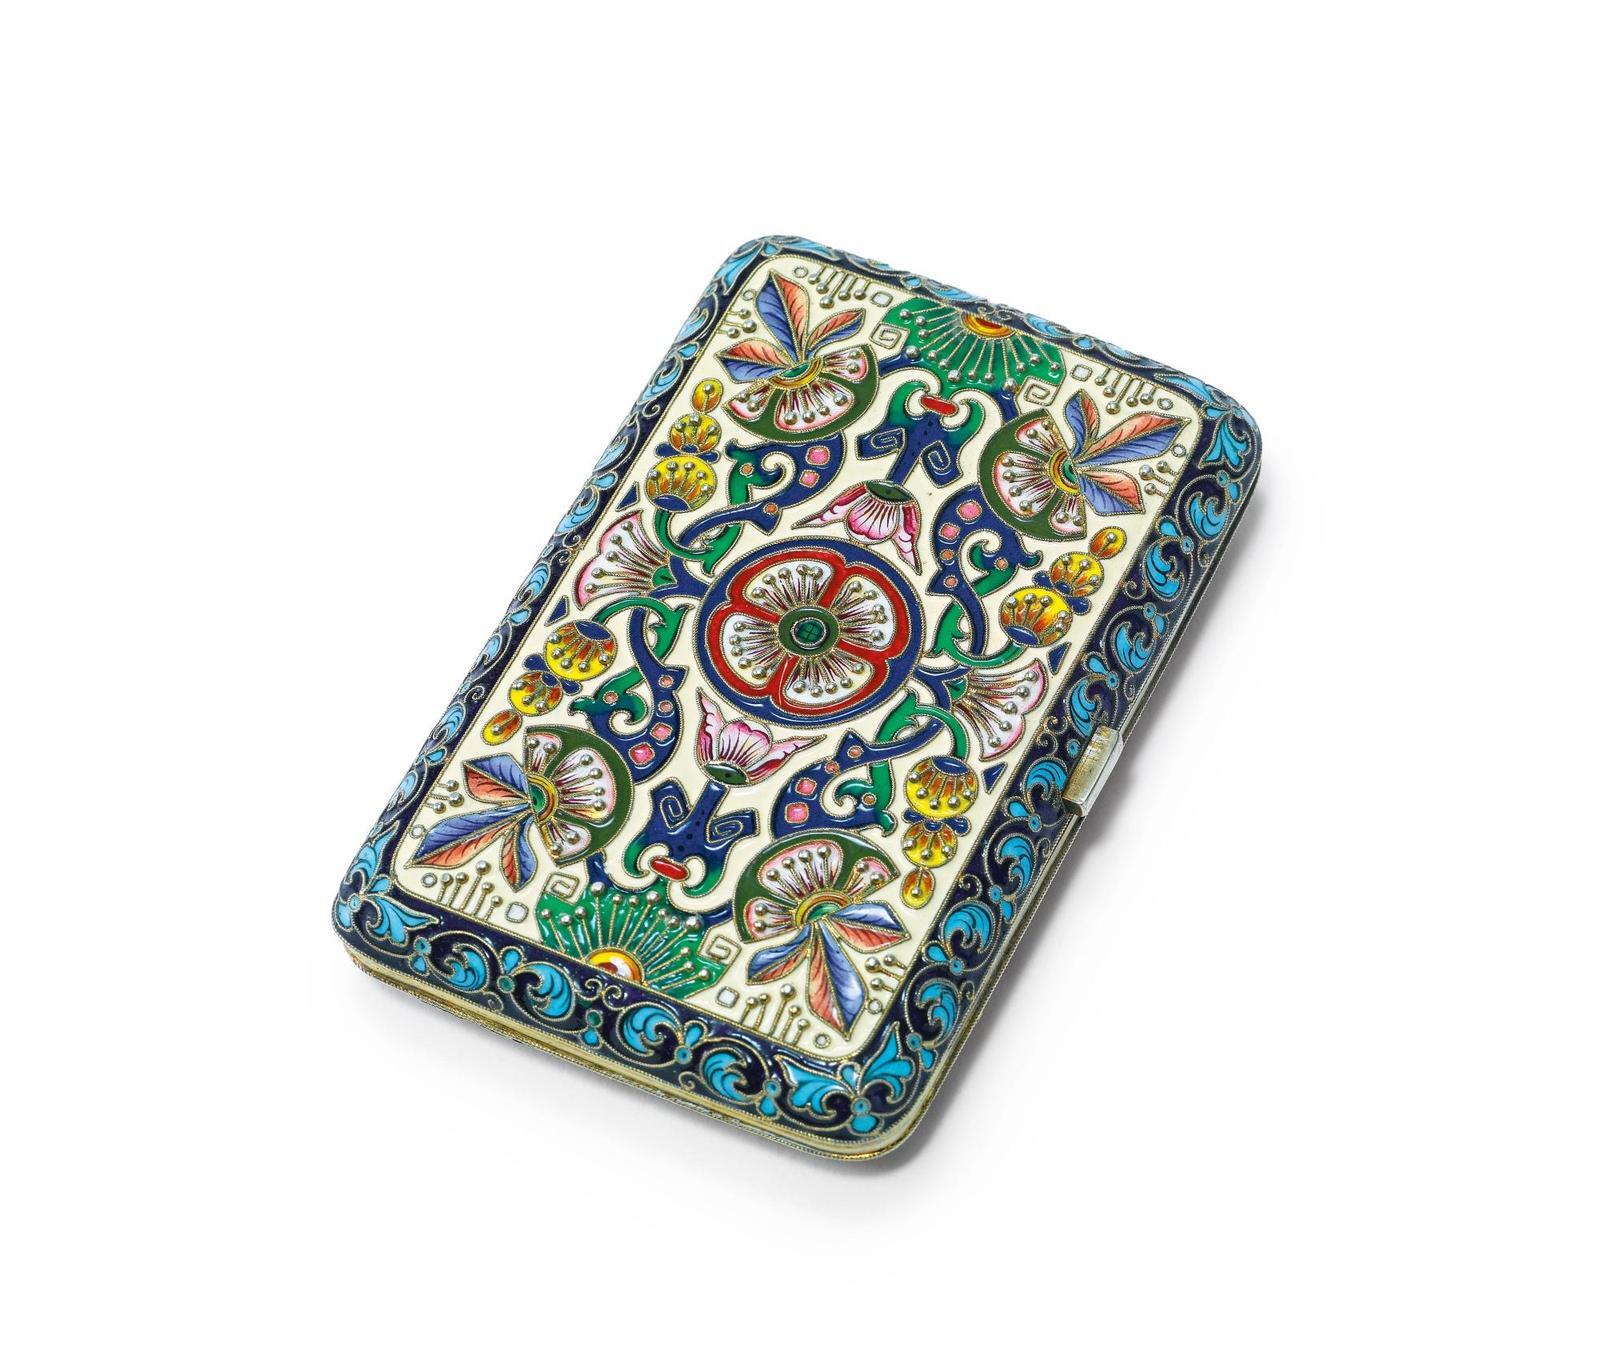 A RUSSIAN GILDED SILVER AND SHADED ENAMEL CIGARETTE CASE, FEDOR RÜCKERT, MOSC...